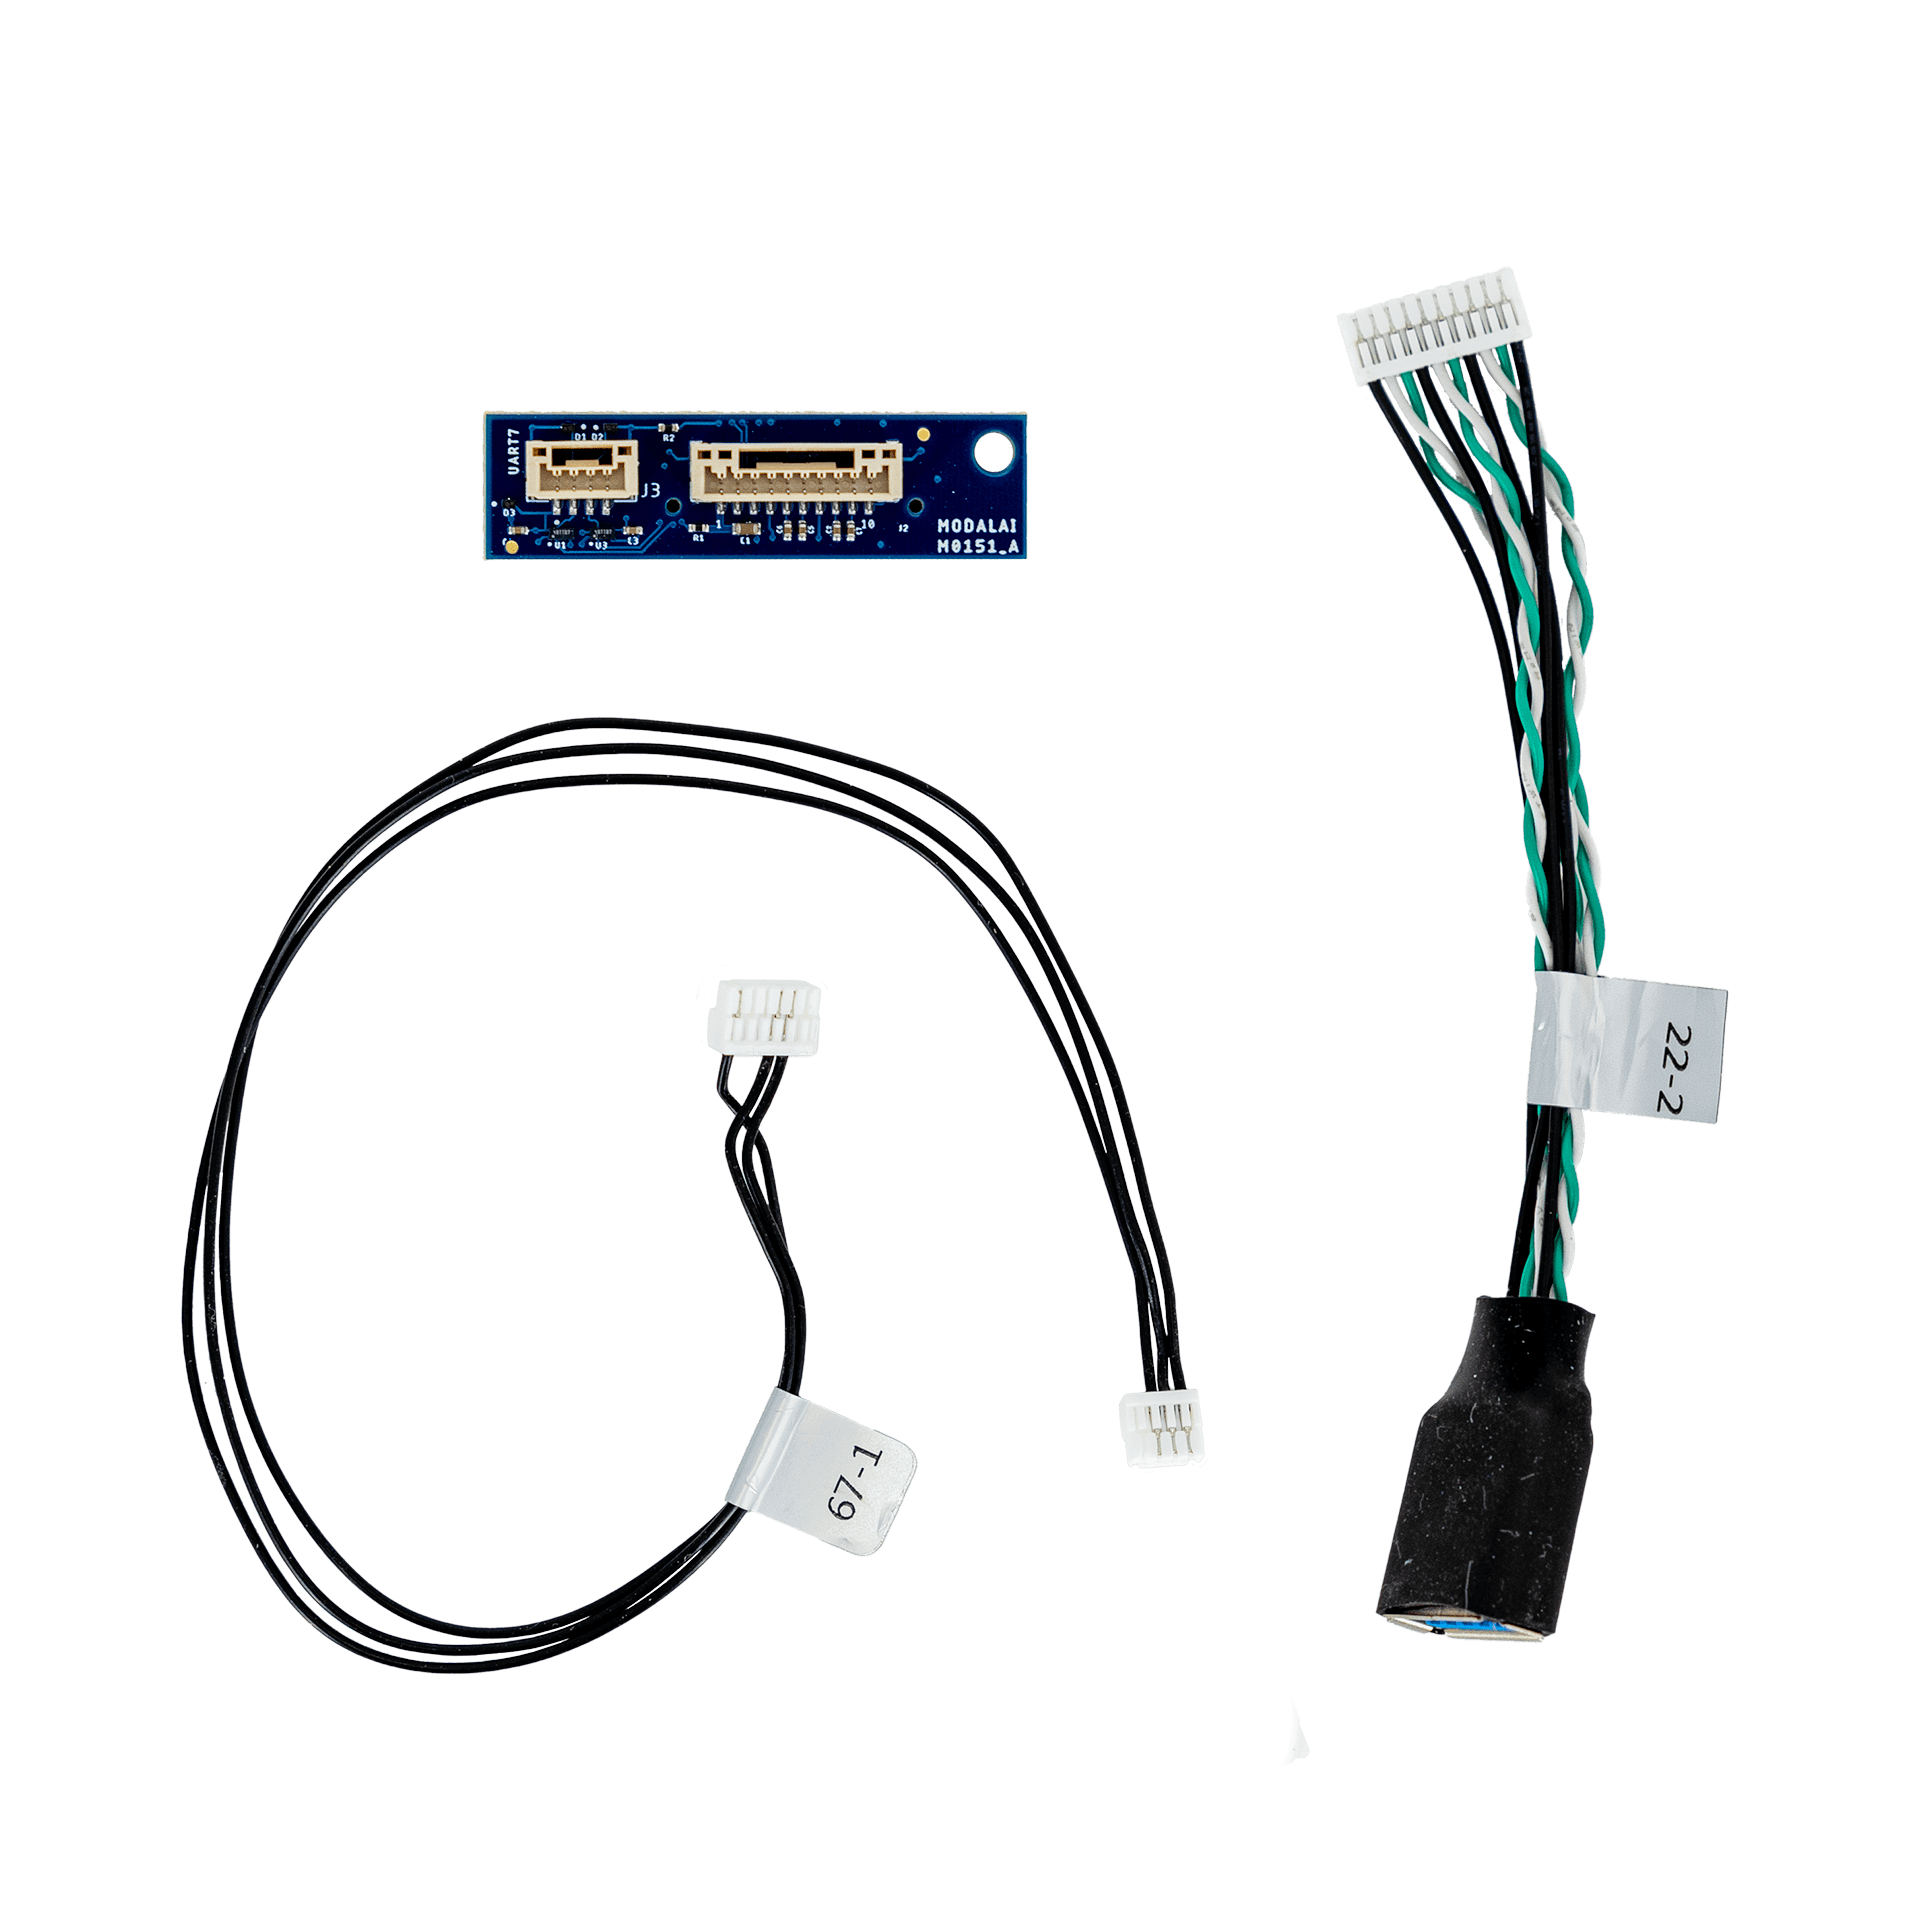 ModalAI, Inc. Accessory Board plus Cables VOXL 2 USB3.0 / UART Expansion Adapter